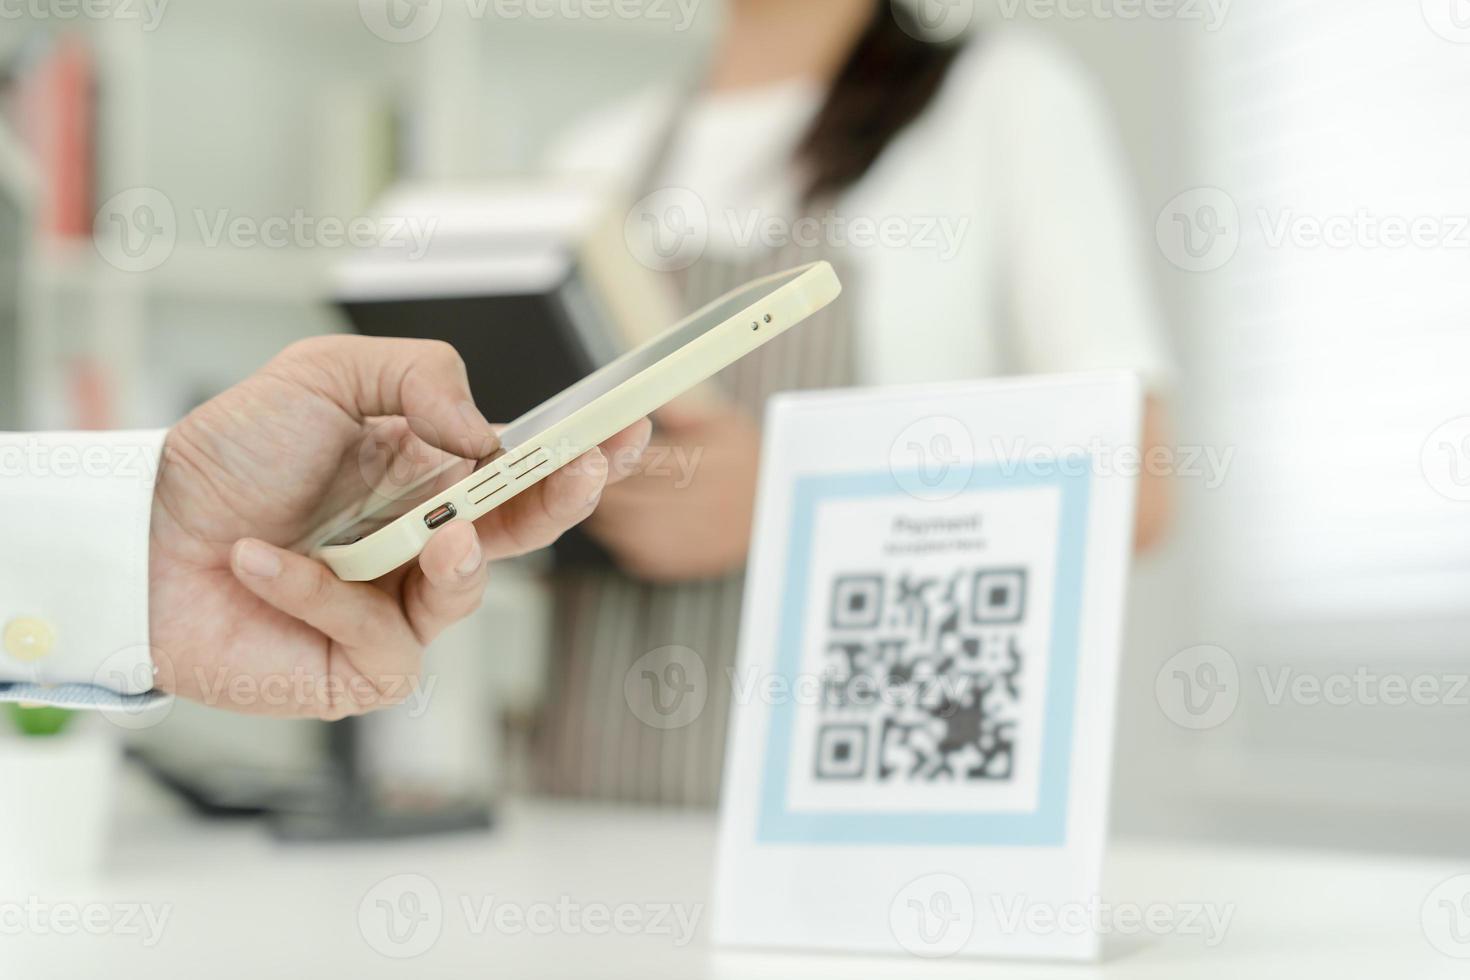 Customer use smartphones to scan QR codes to pay in-store with digital payments without cash. scanning get discounts. E wallet, technology, online payment, banking app, smart city, money transfer. photo